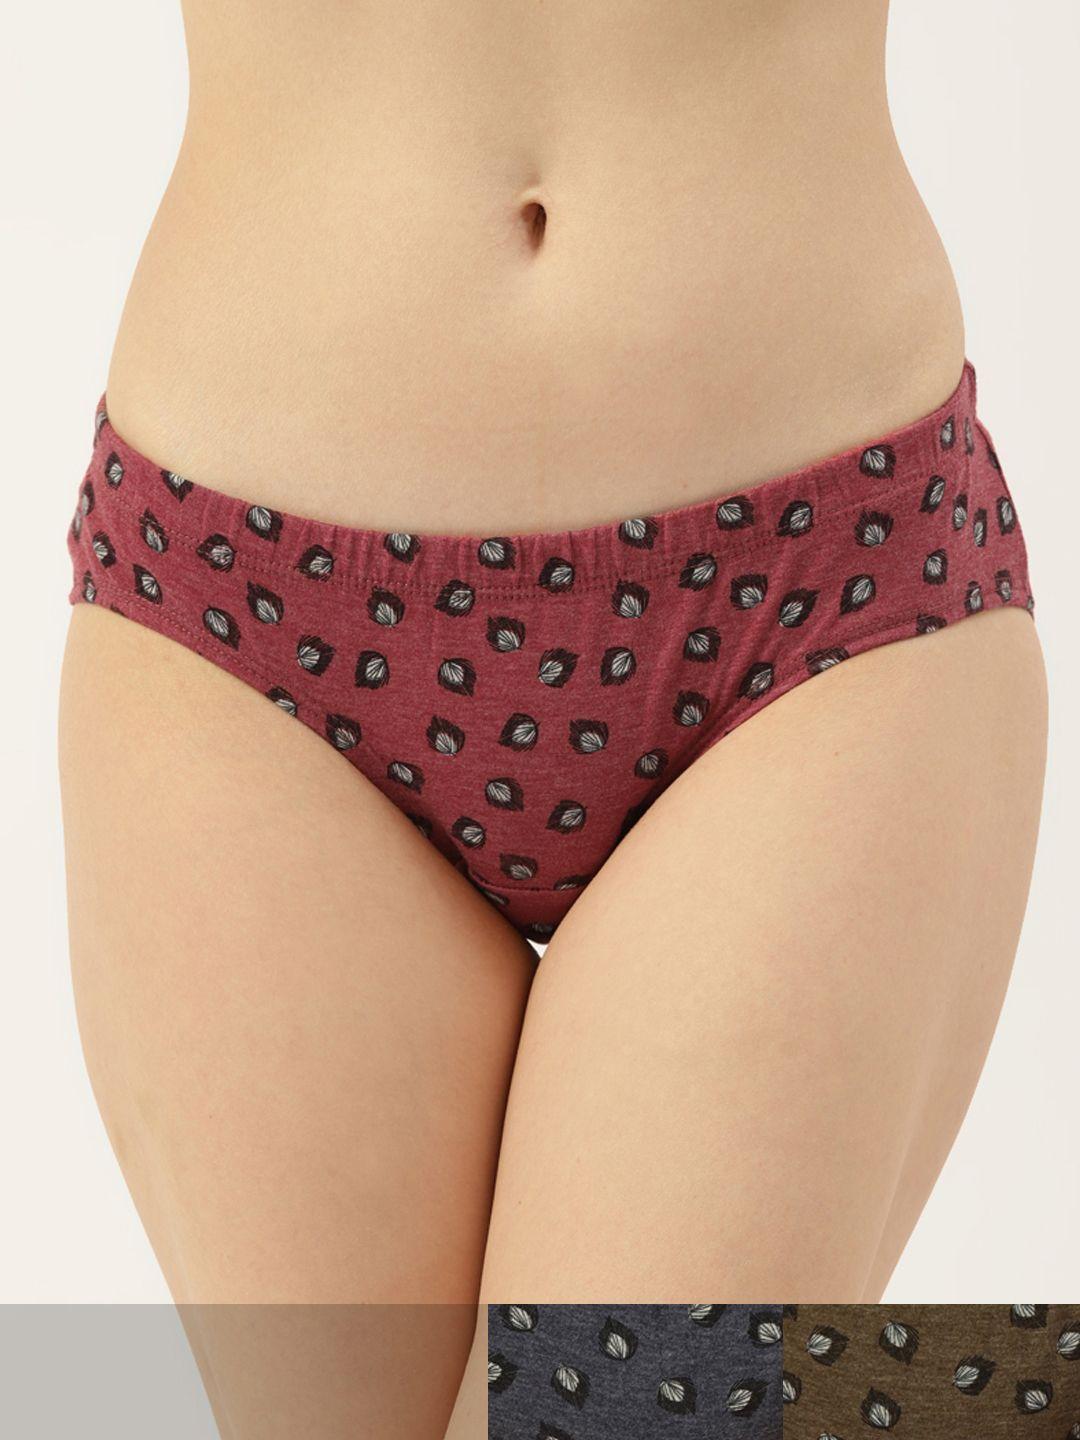 amosio women pack of 3 cotton floral print mid-rise hipster briefs hp-9022-3